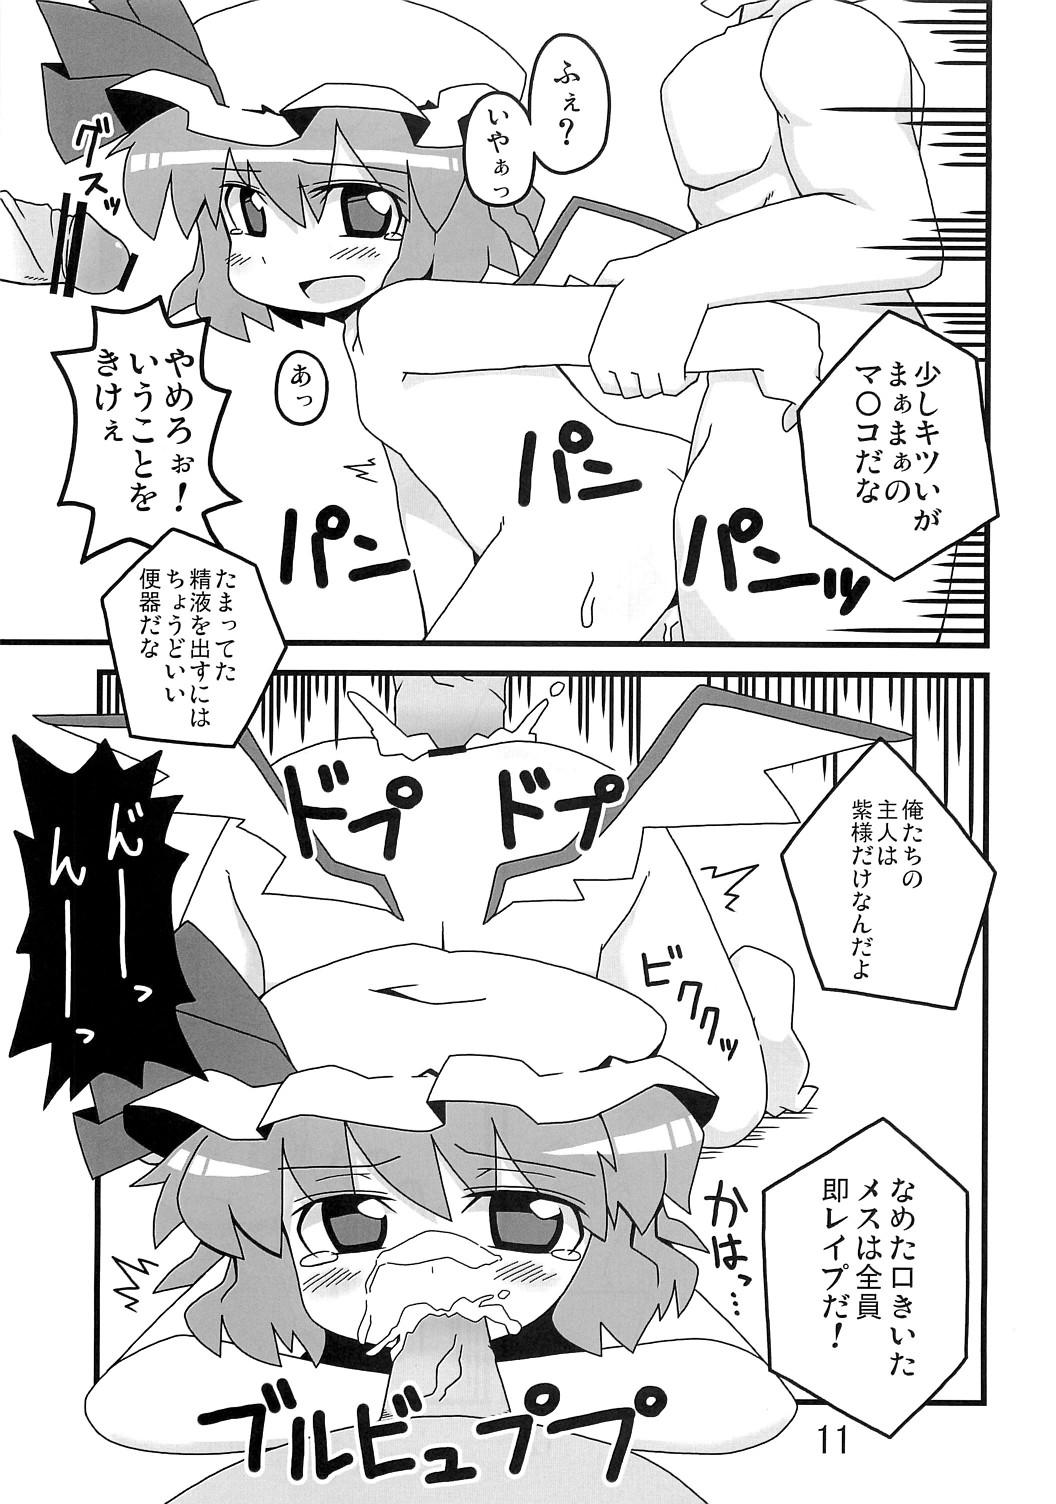 Teenager 東方豊年祭 - Touhou project Tamil - Page 10